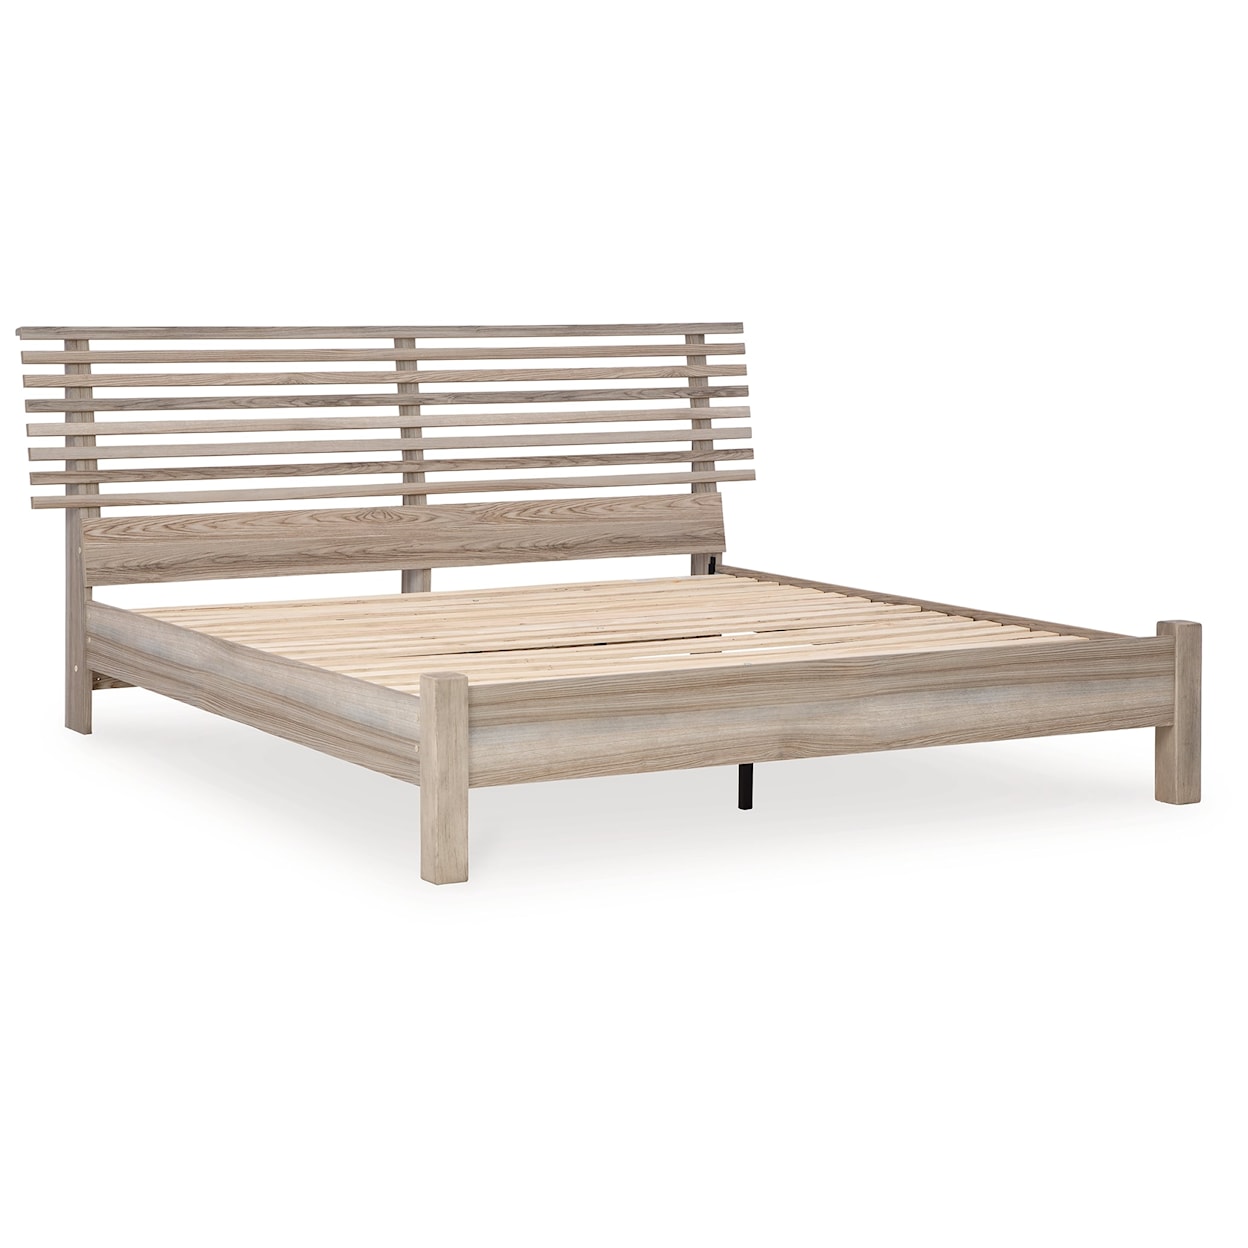 Signature Design by Ashley Hasbrick Queen Slat Panel Bed